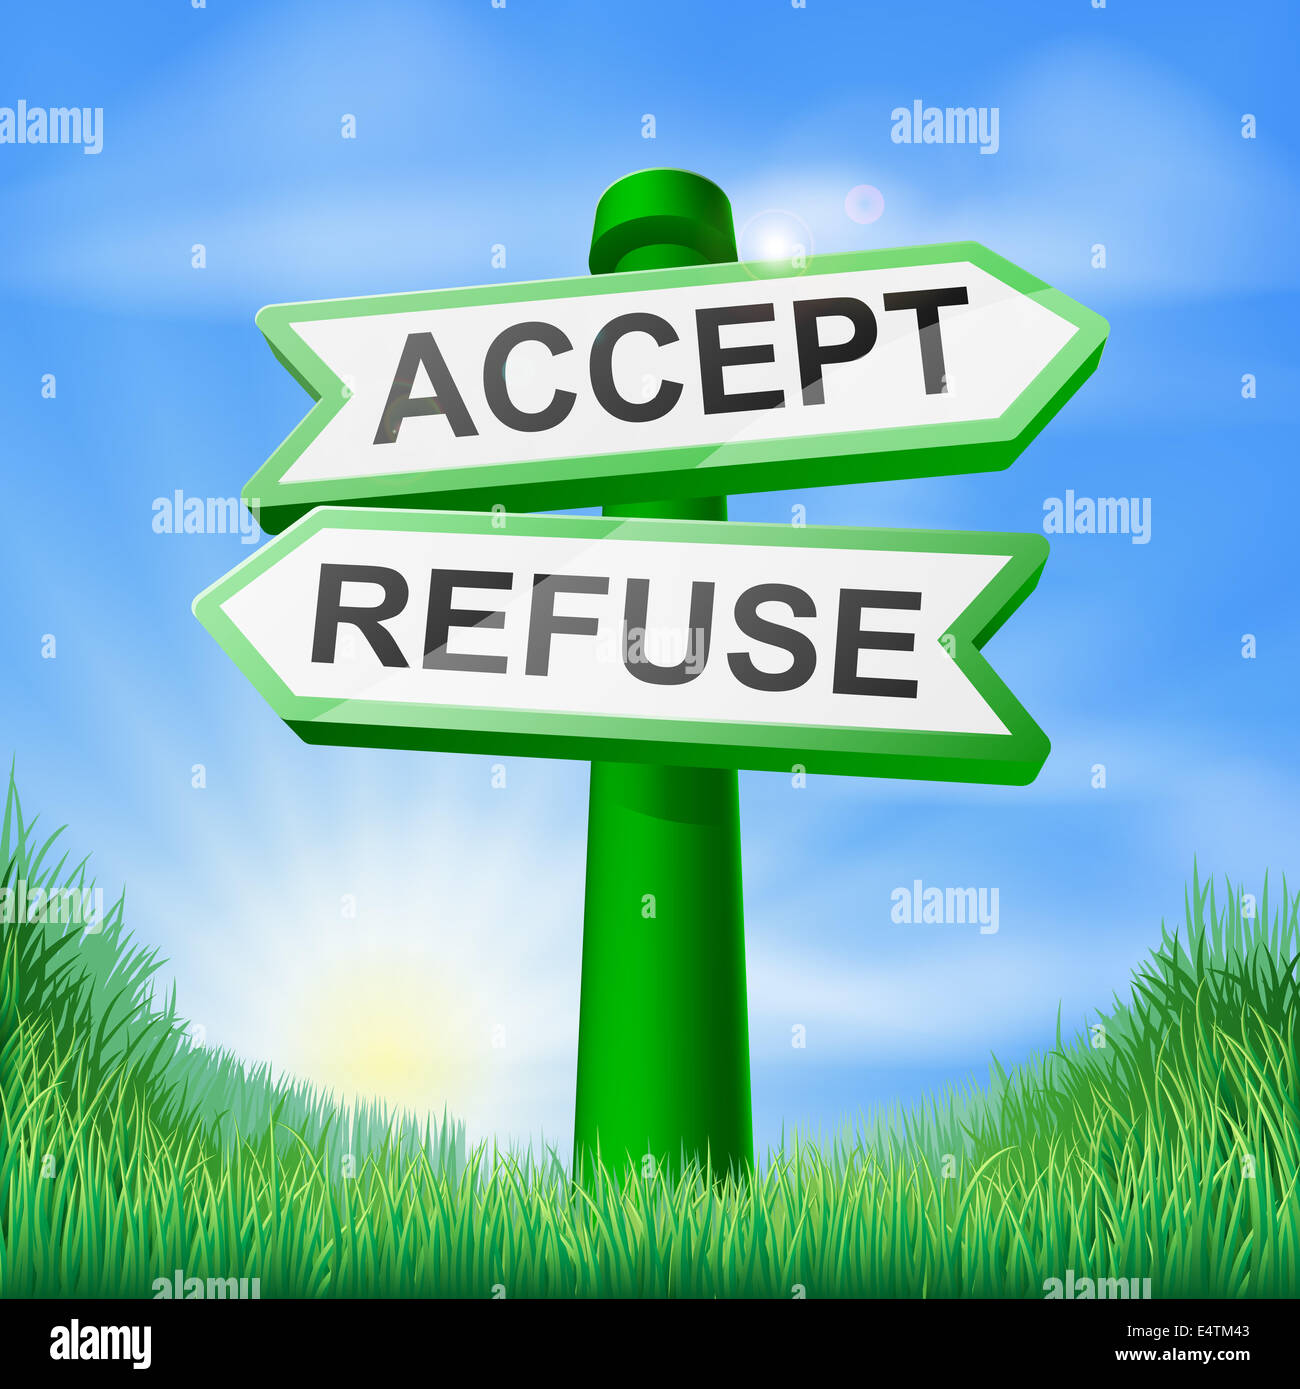 Accept or refuse sign in a sunny green field of lush grass Stock Photo